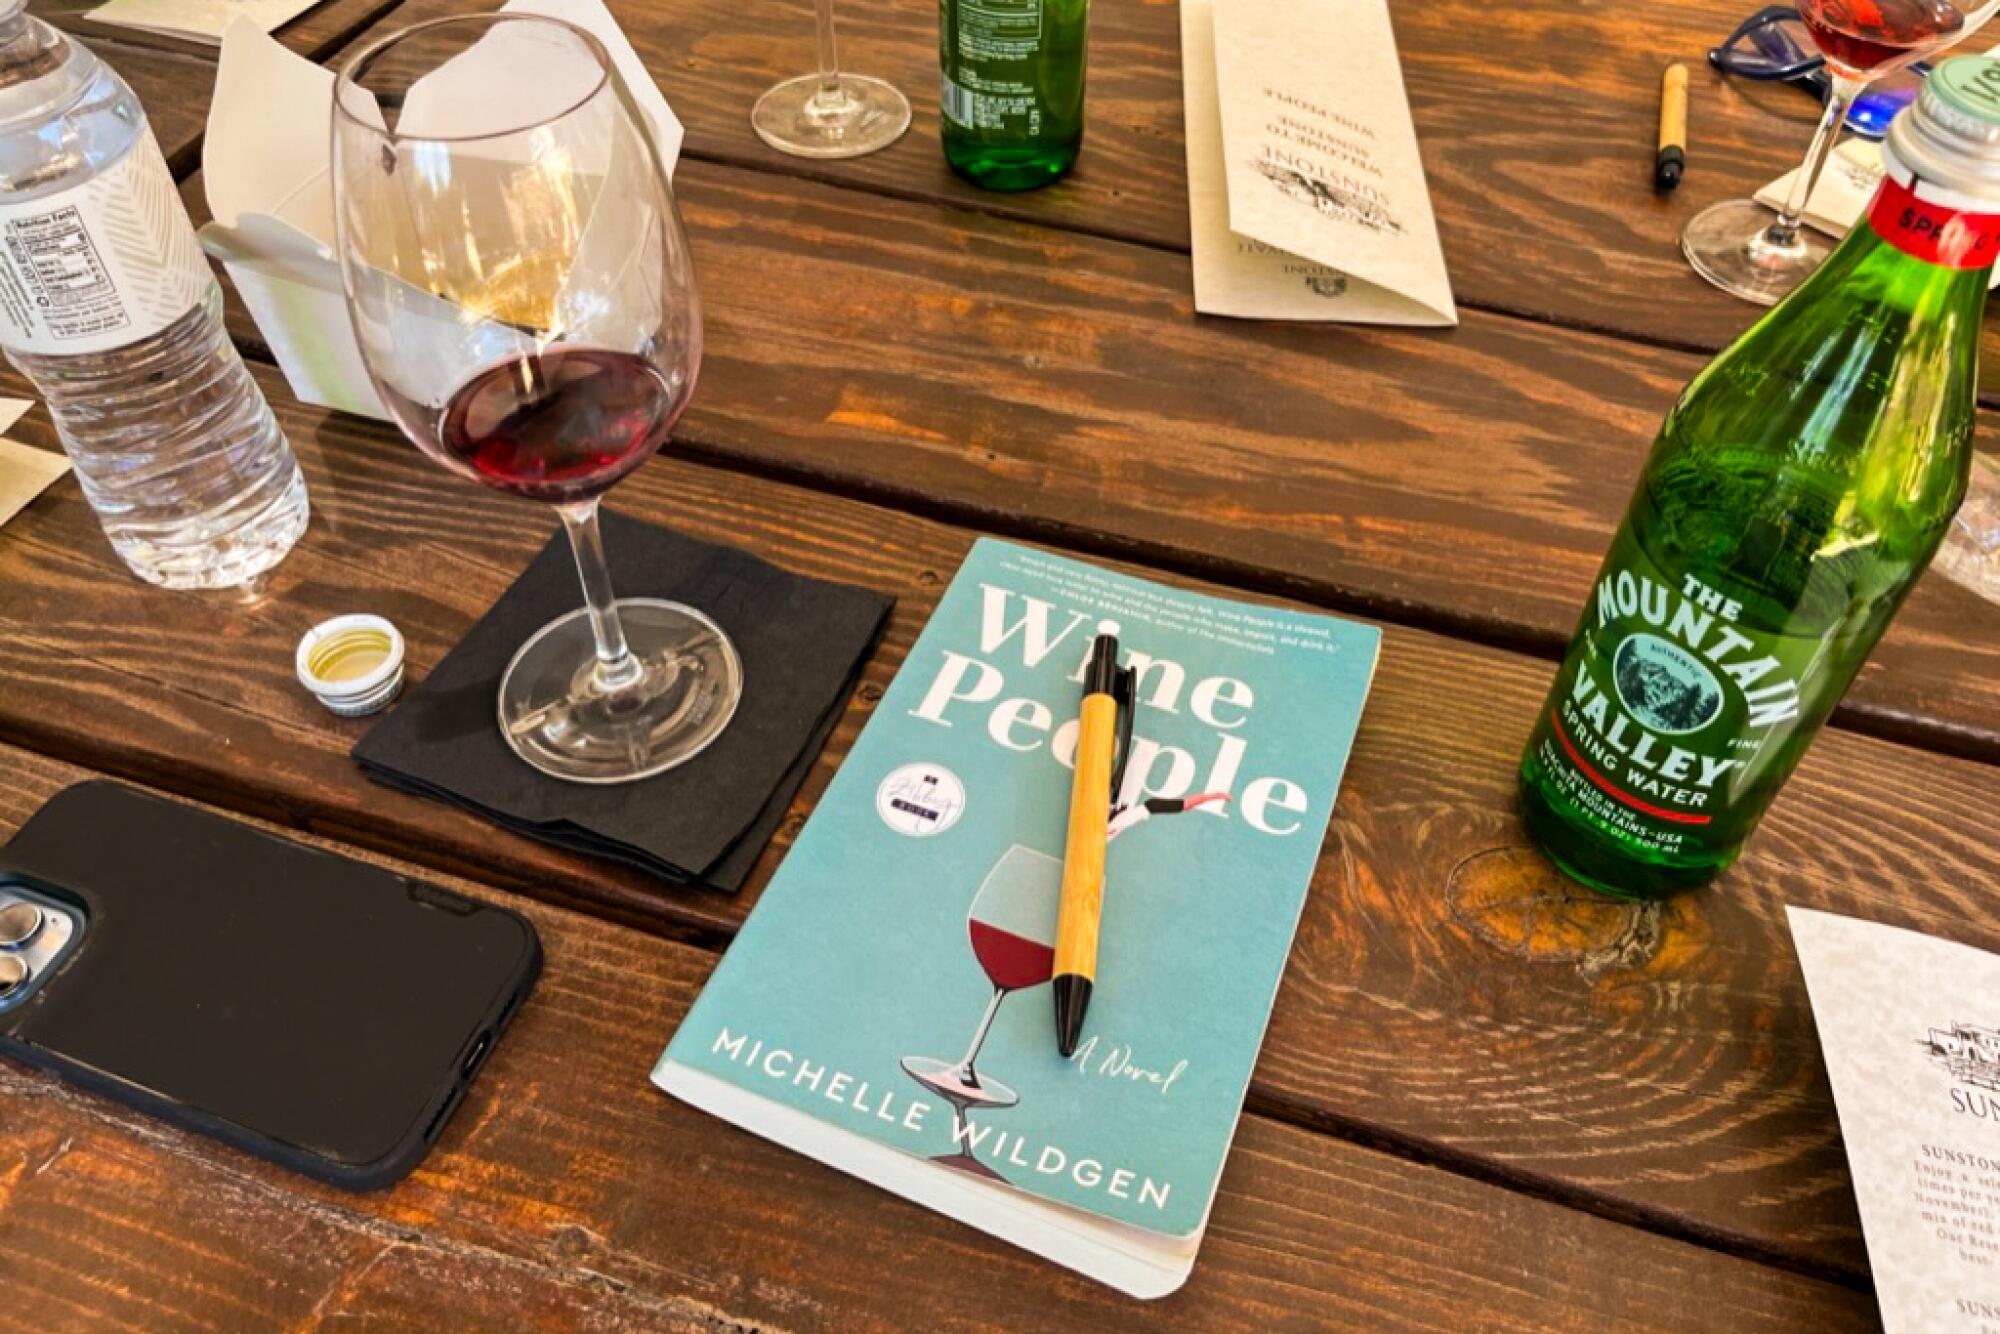 A book and glass of wine. 